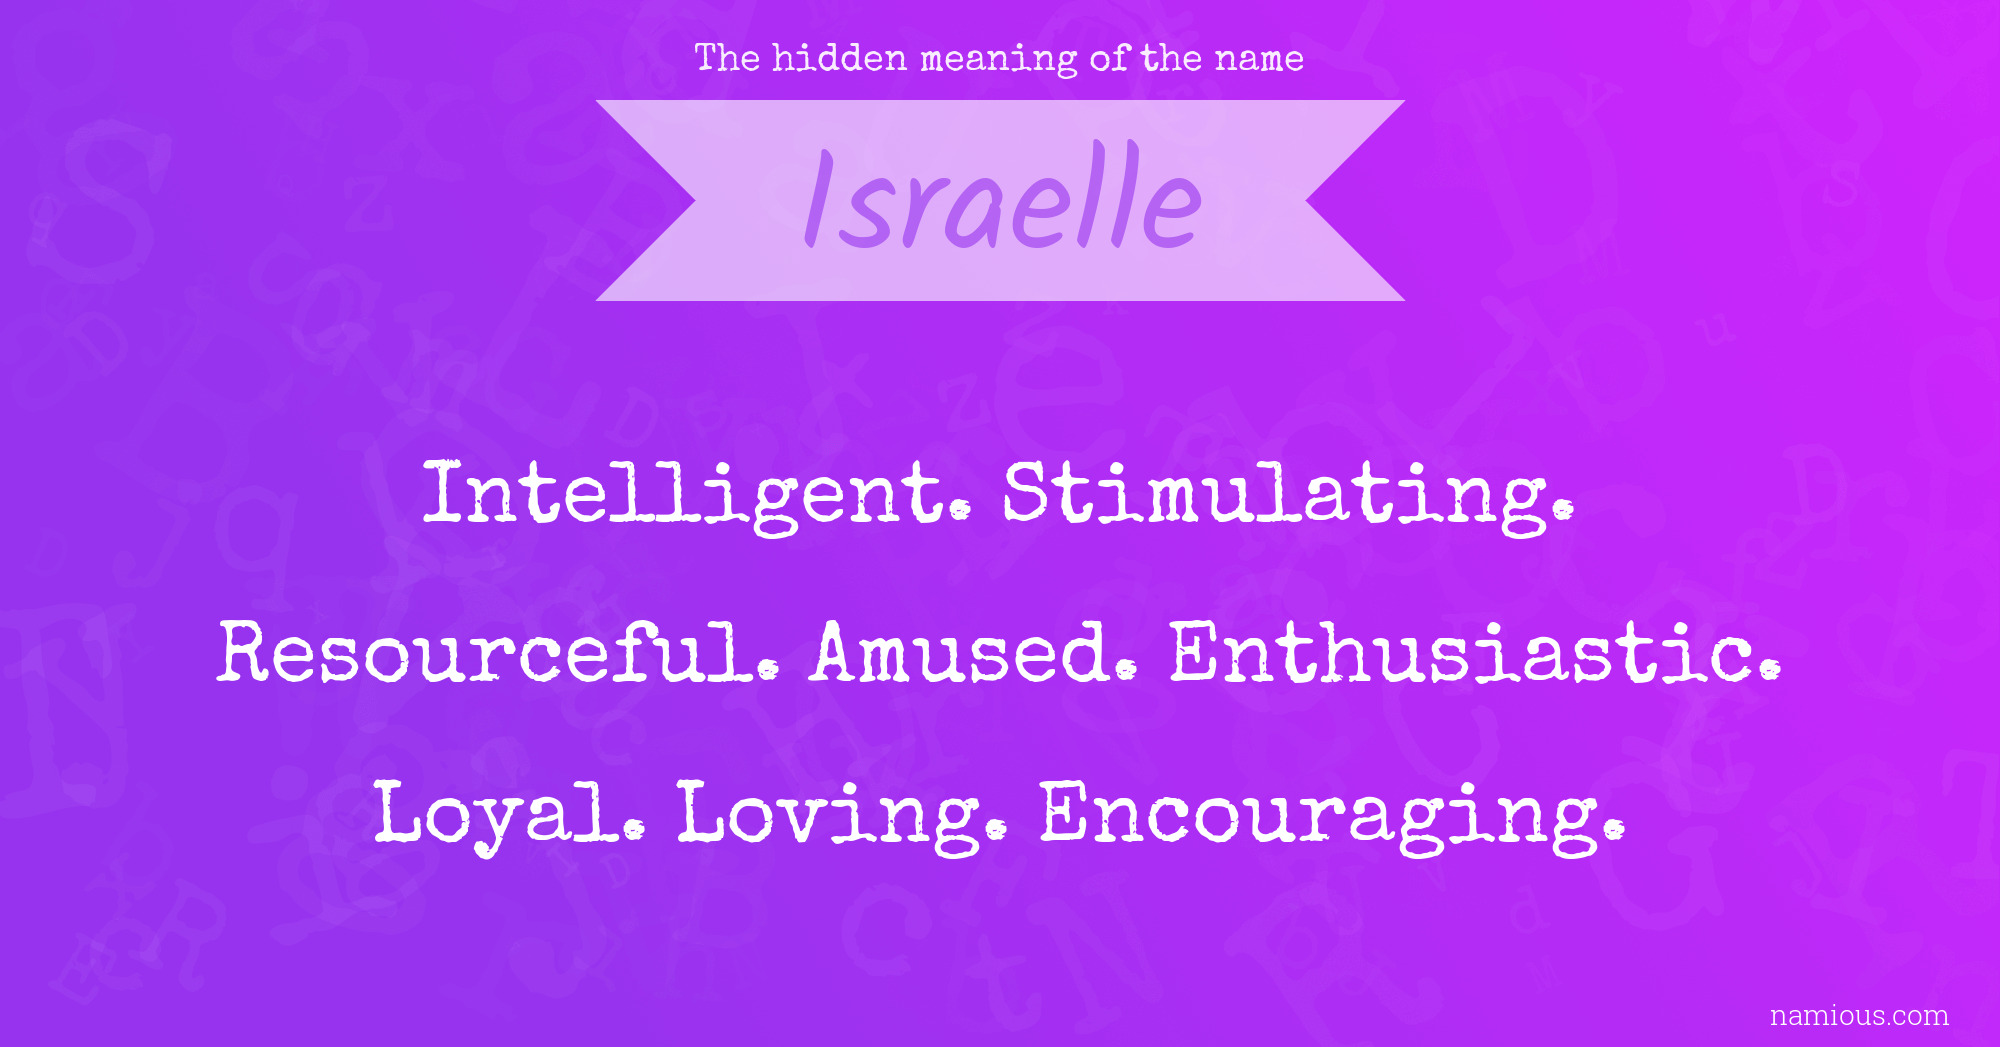 The hidden meaning of the name Israelle